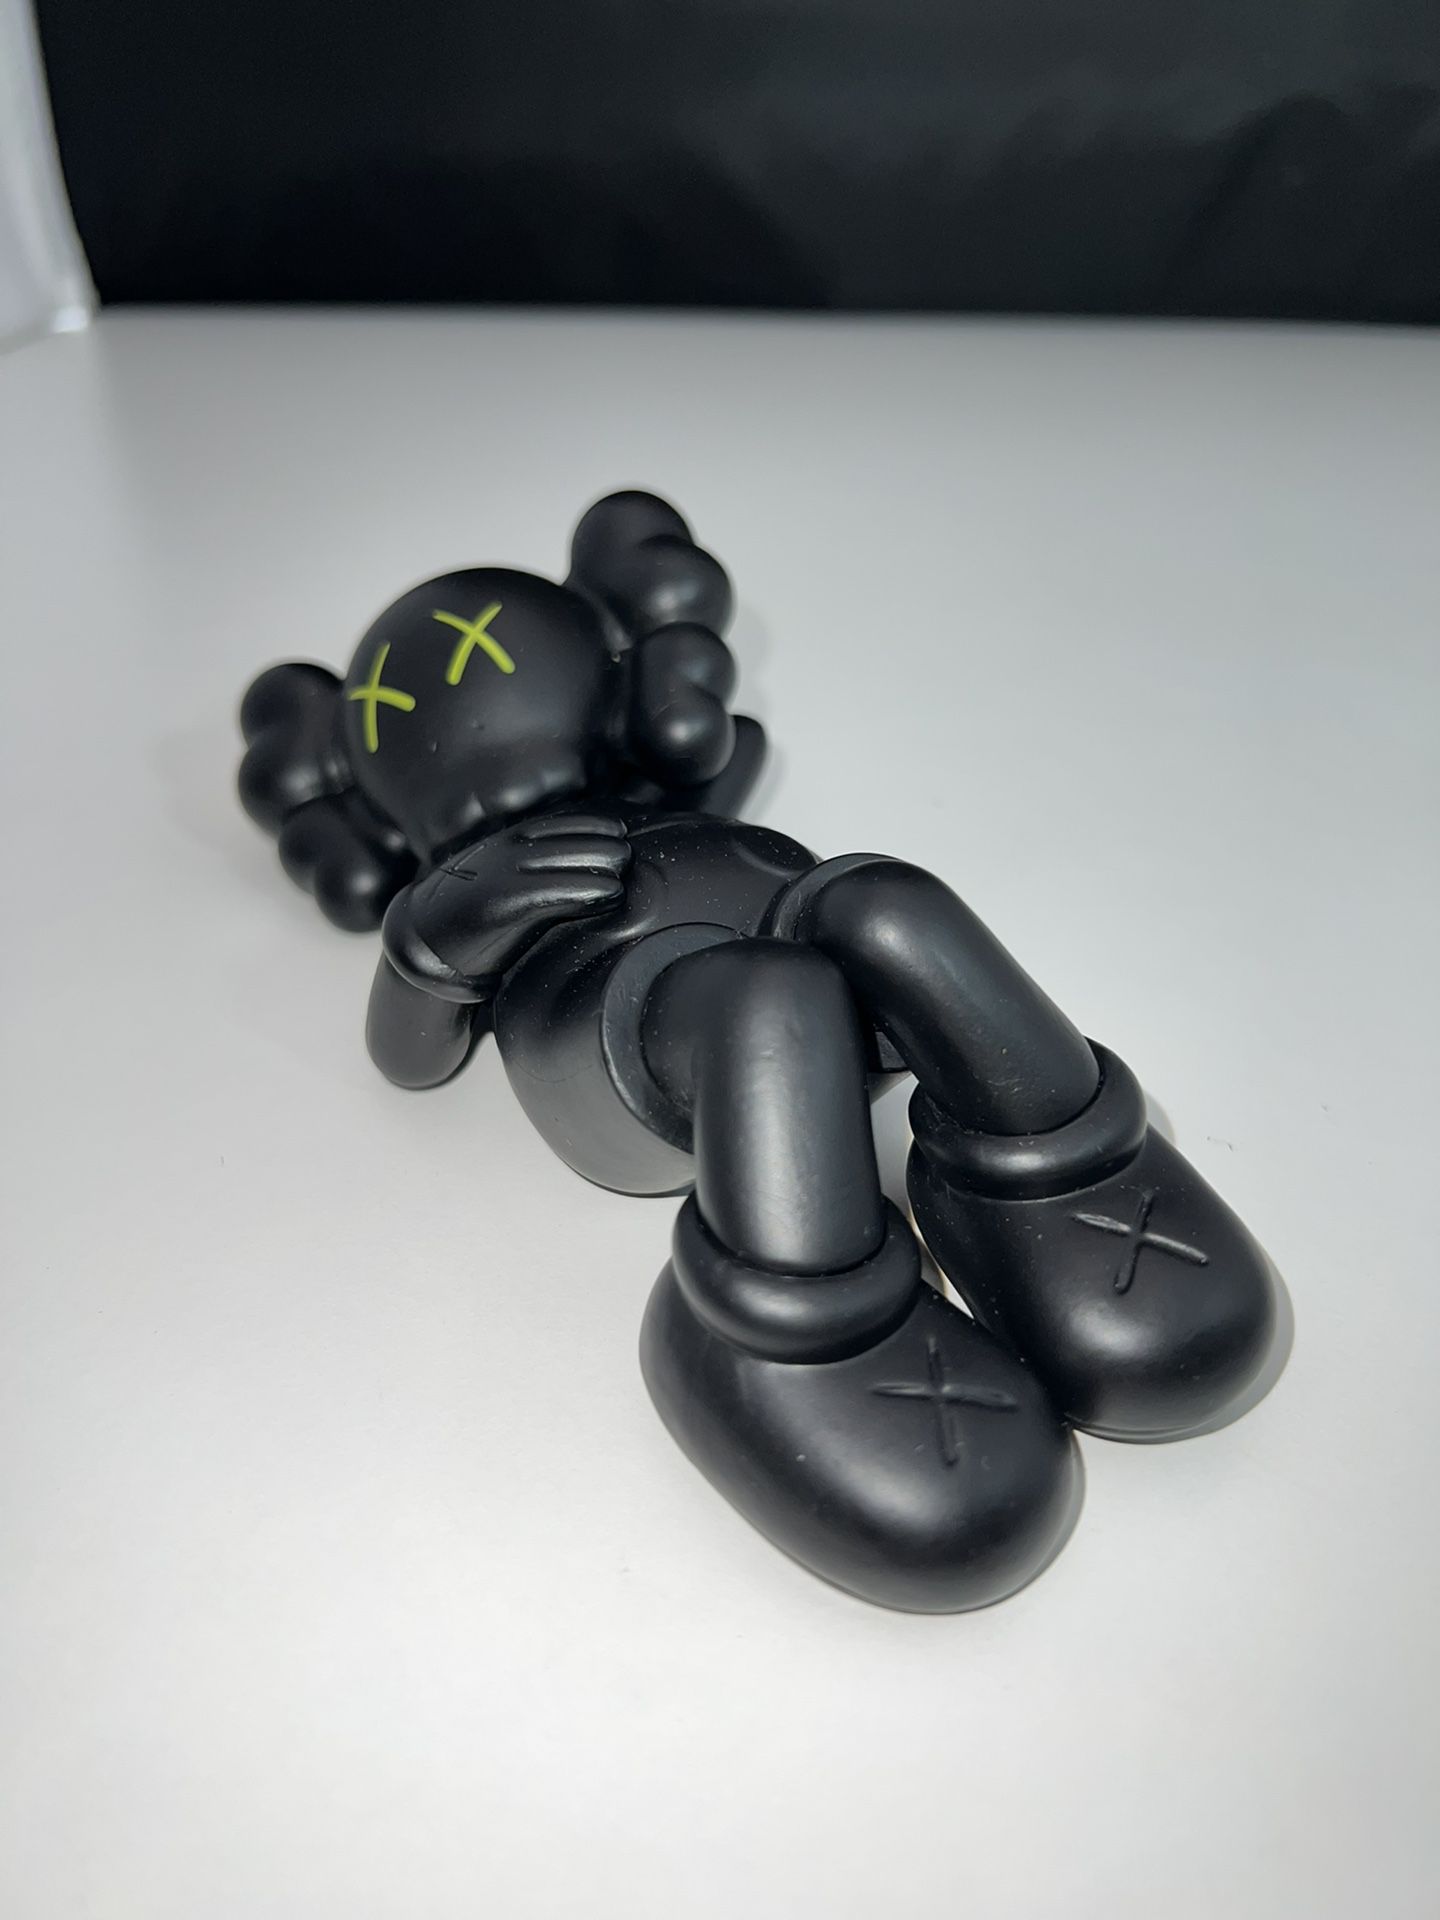 KAWS Inspired Sculpture Bear Figure Collectibles Building Blocks LAYING Down Home Decoration, Model Toy Unique Gift - Black